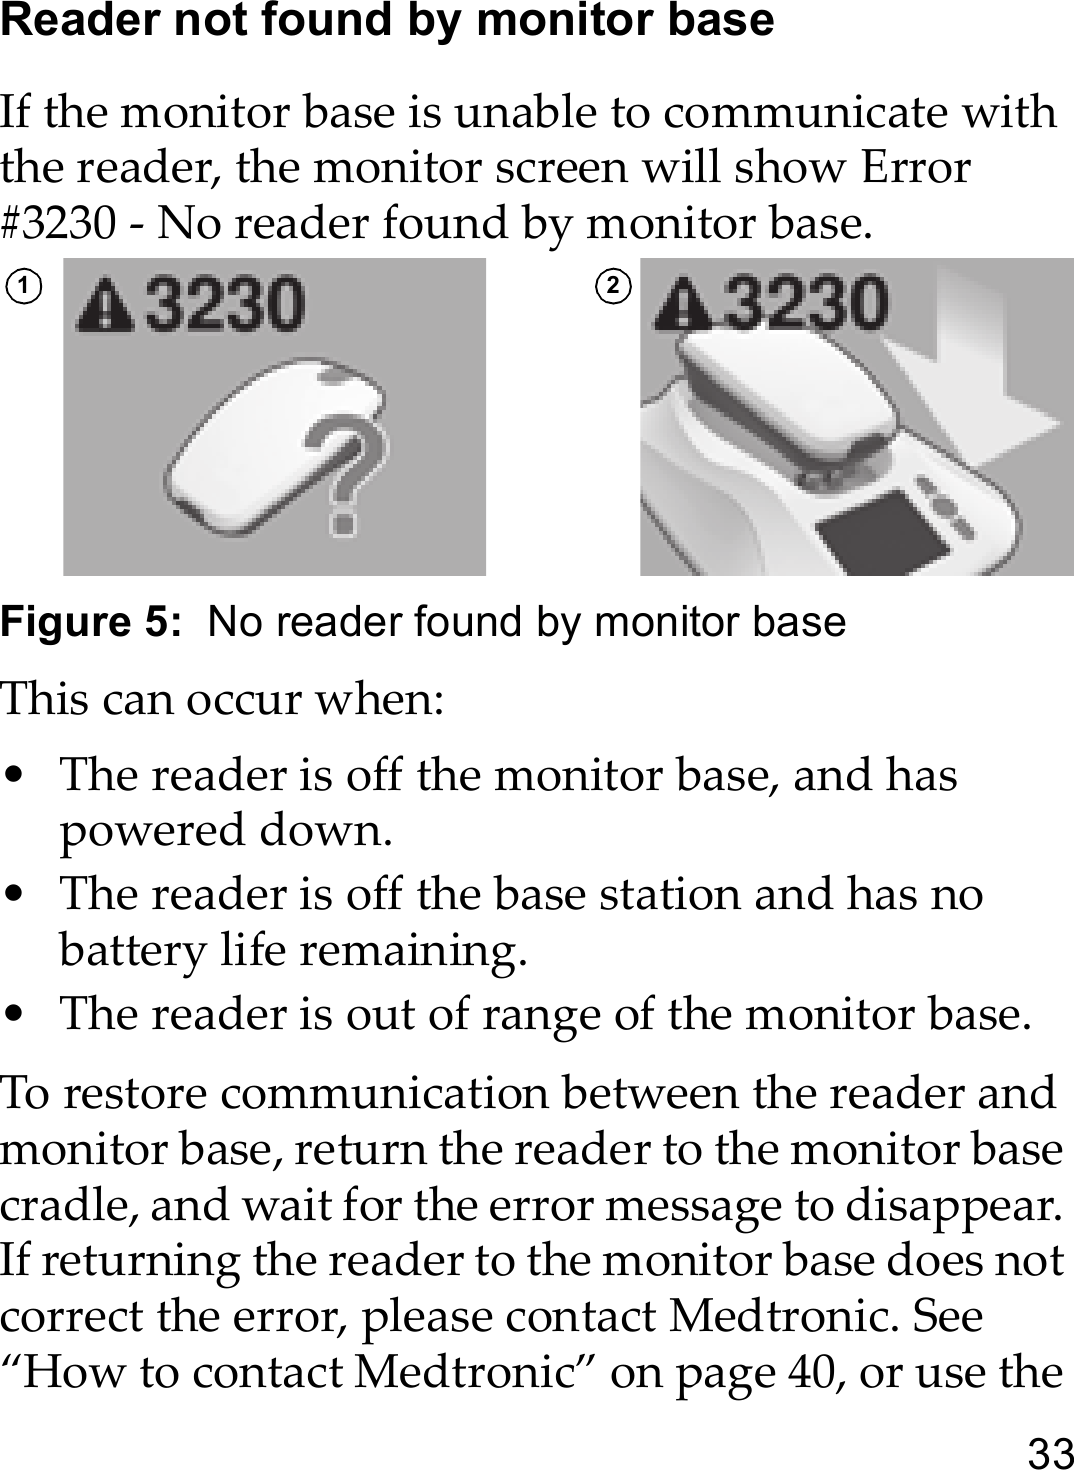 33Reader not found by monitor baseIf the monitor base is unable to communicate with the reader, the monitor screen will show Error #3230 - No reader found by monitor base.Figure 5:  No reader found by monitor baseThis can occur when:• The reader is off the monitor base, and has powered down.• The reader is off the base station and has no battery life remaining.• The reader is out of range of the monitor base.To restore communication between the reader and monitor base, return the reader to the monitor base cradle, and wait for the error message to disappear. If returning the reader to the monitor base does not correct the error, please contact Medtronic. See “How to contact Medtronic” on page 40, or use the 1 2